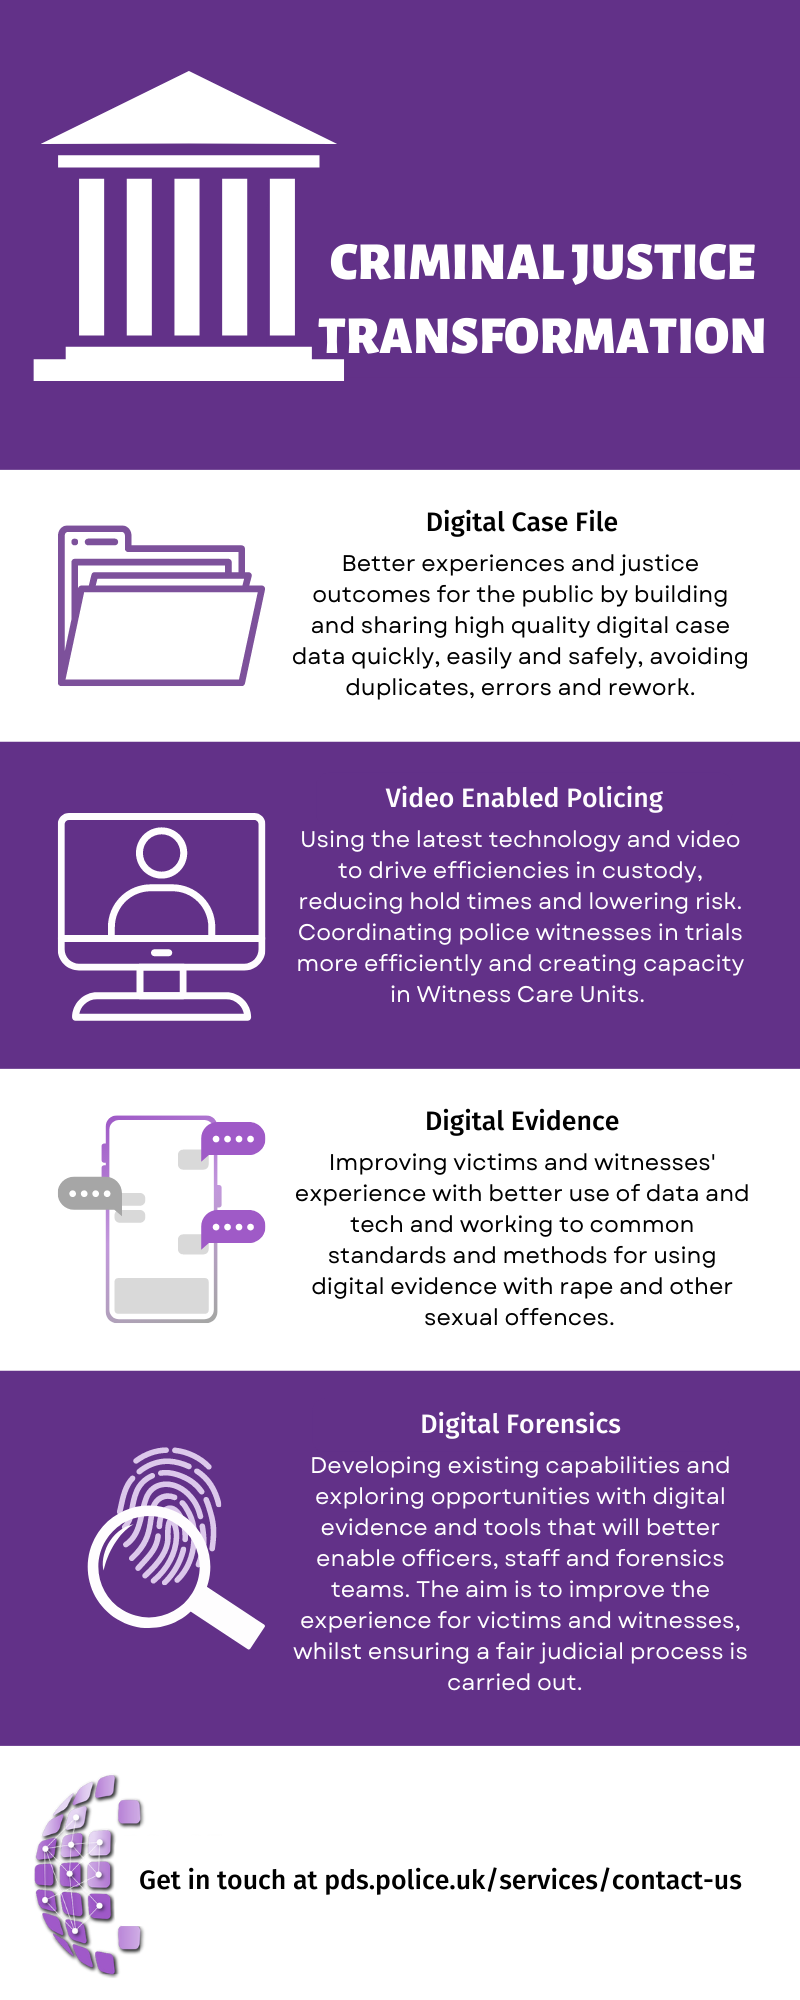 An infographic highlighting Criminal Justice Transformation capabilities